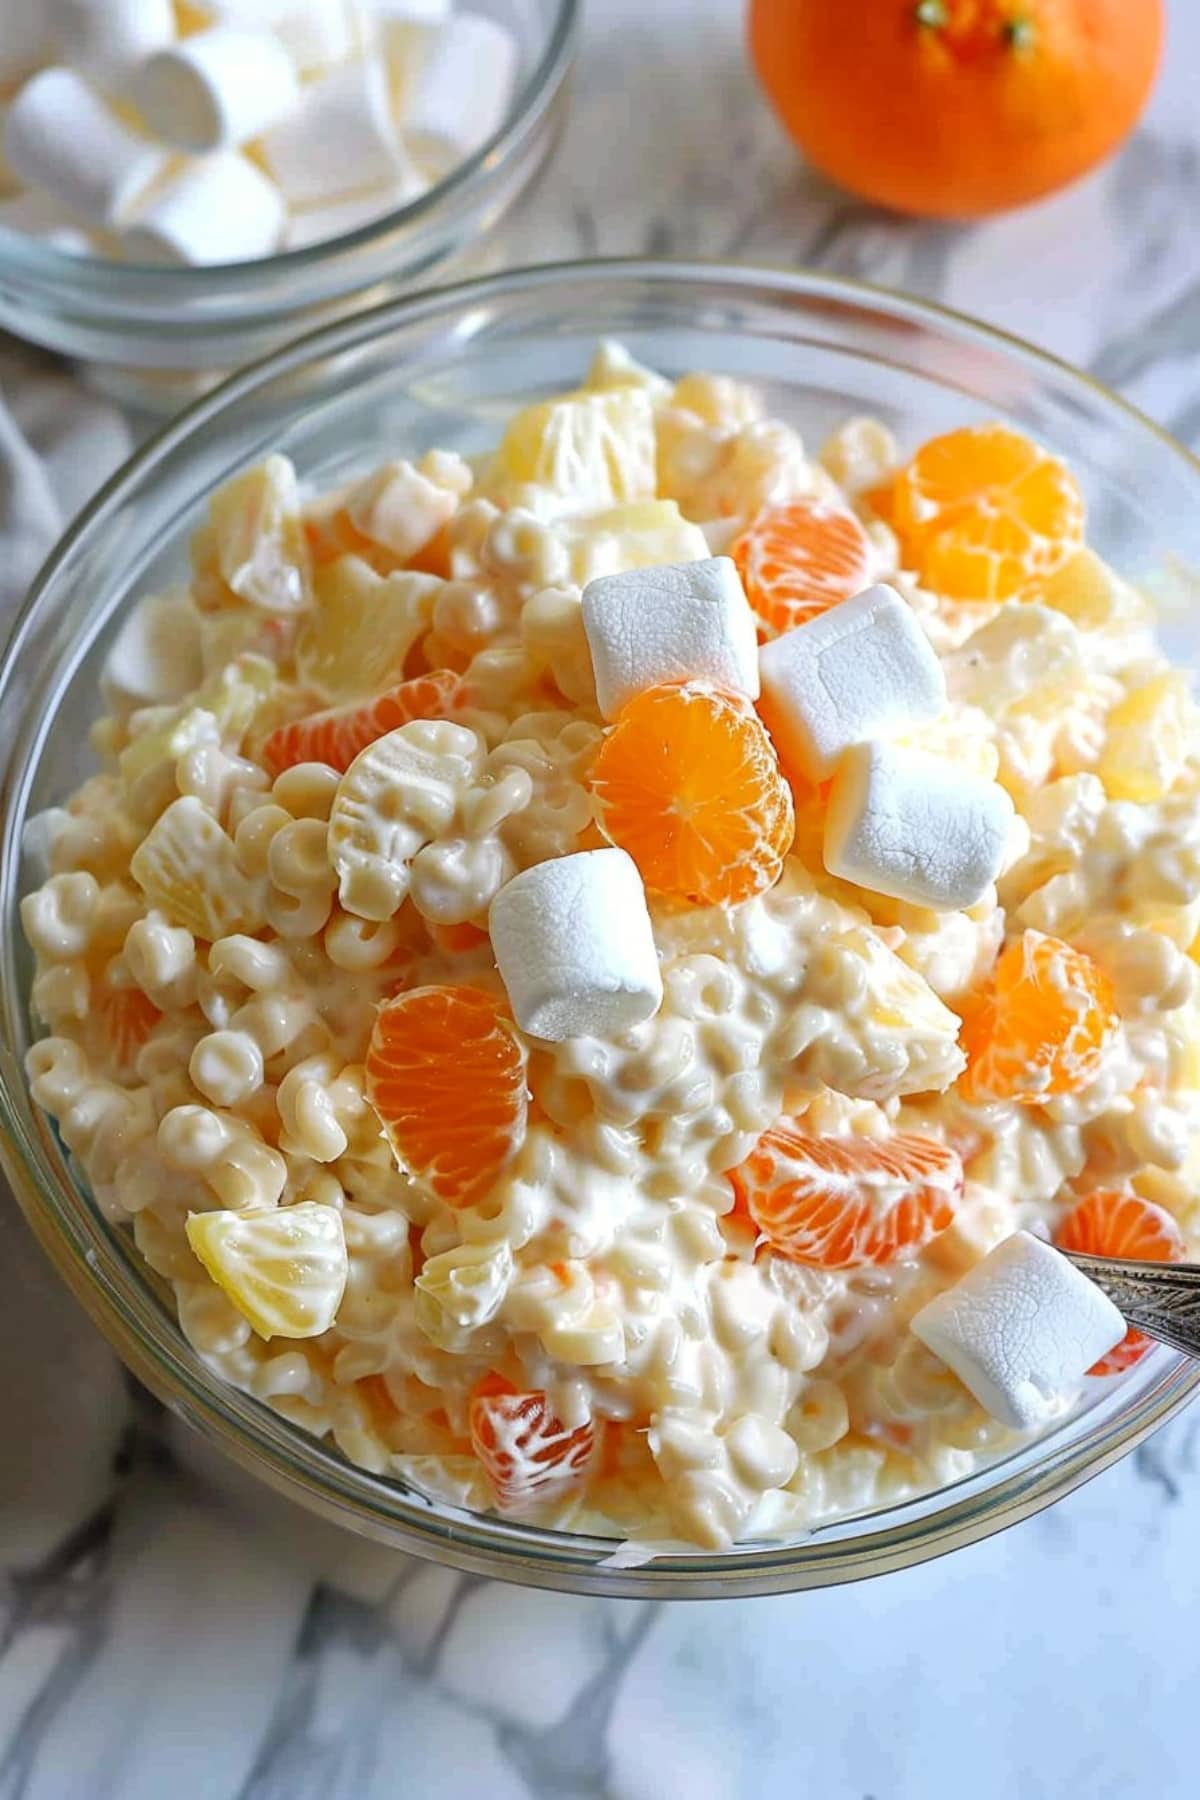 Cold fruit frog eye salad with oranges, pineapple and mini marshmallows